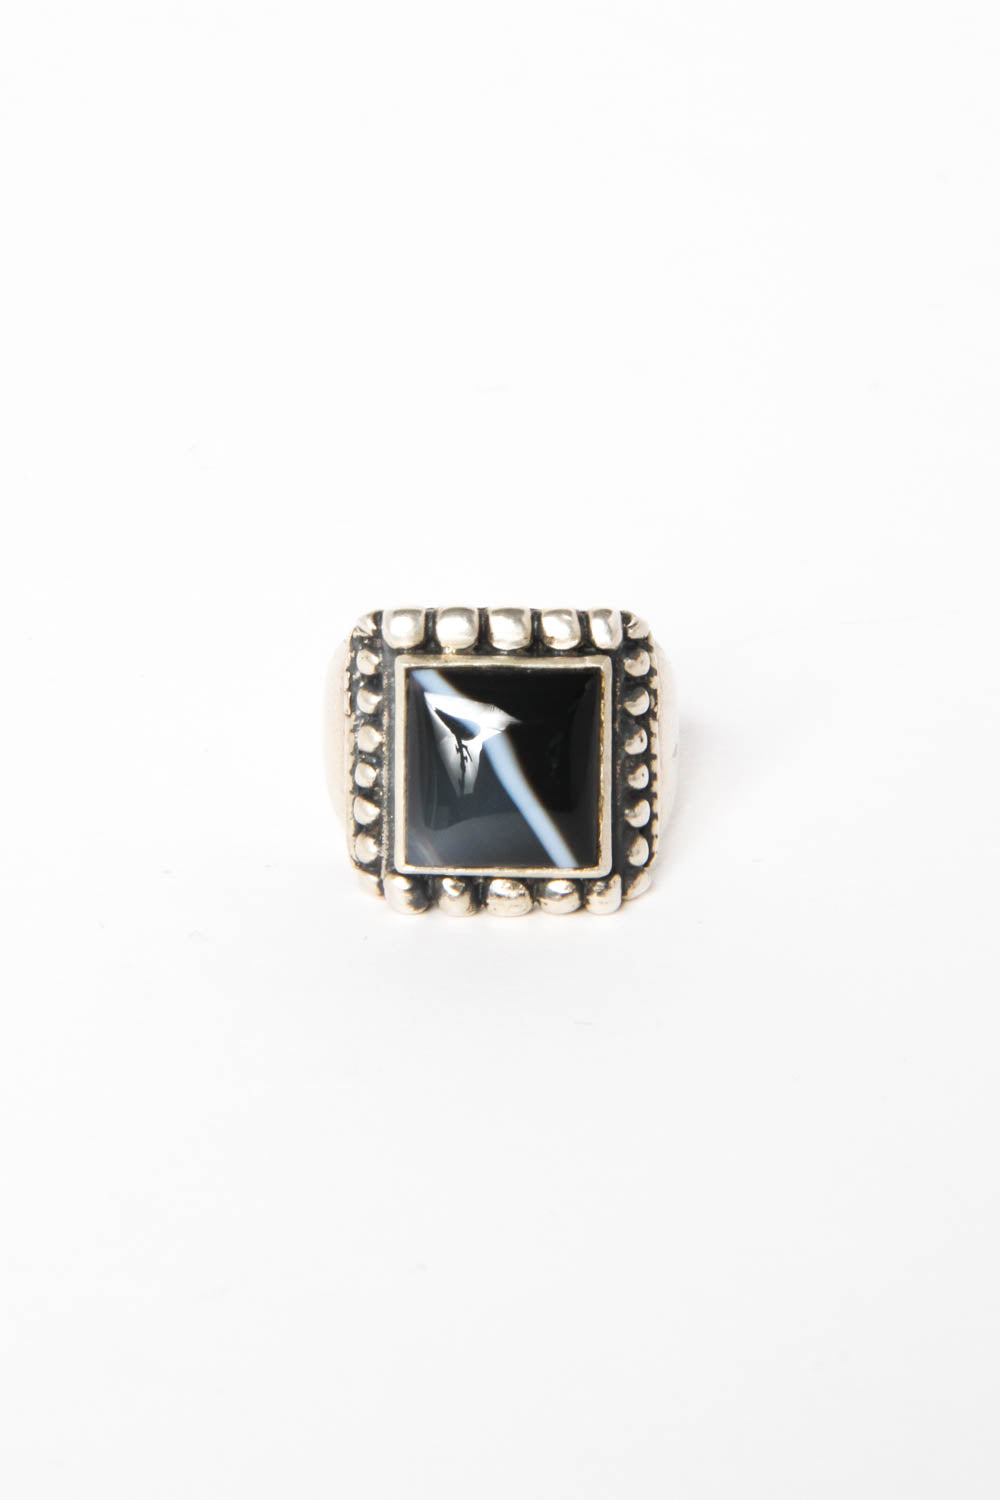 Women's Black Onyx "Marquee" Ring Size 8